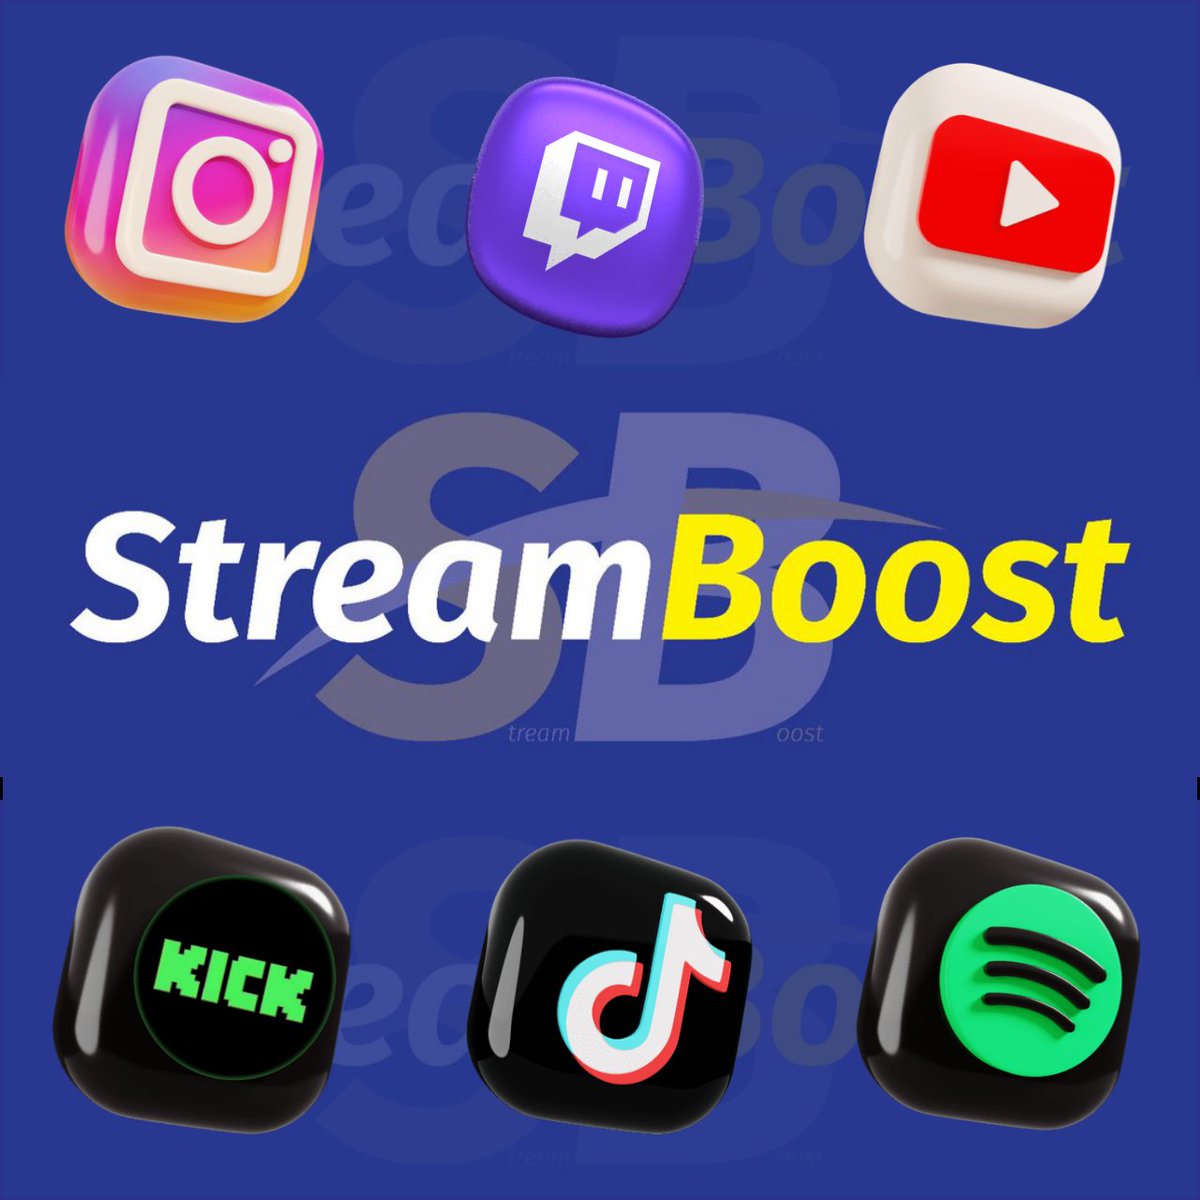 Under 500 Followers on Twitch & kick?

- Follow us.
- Drop Your Link 🔗
- Do Like & Repost ♻️
- Lets Grow 🤝

Dm For Special Promotion.